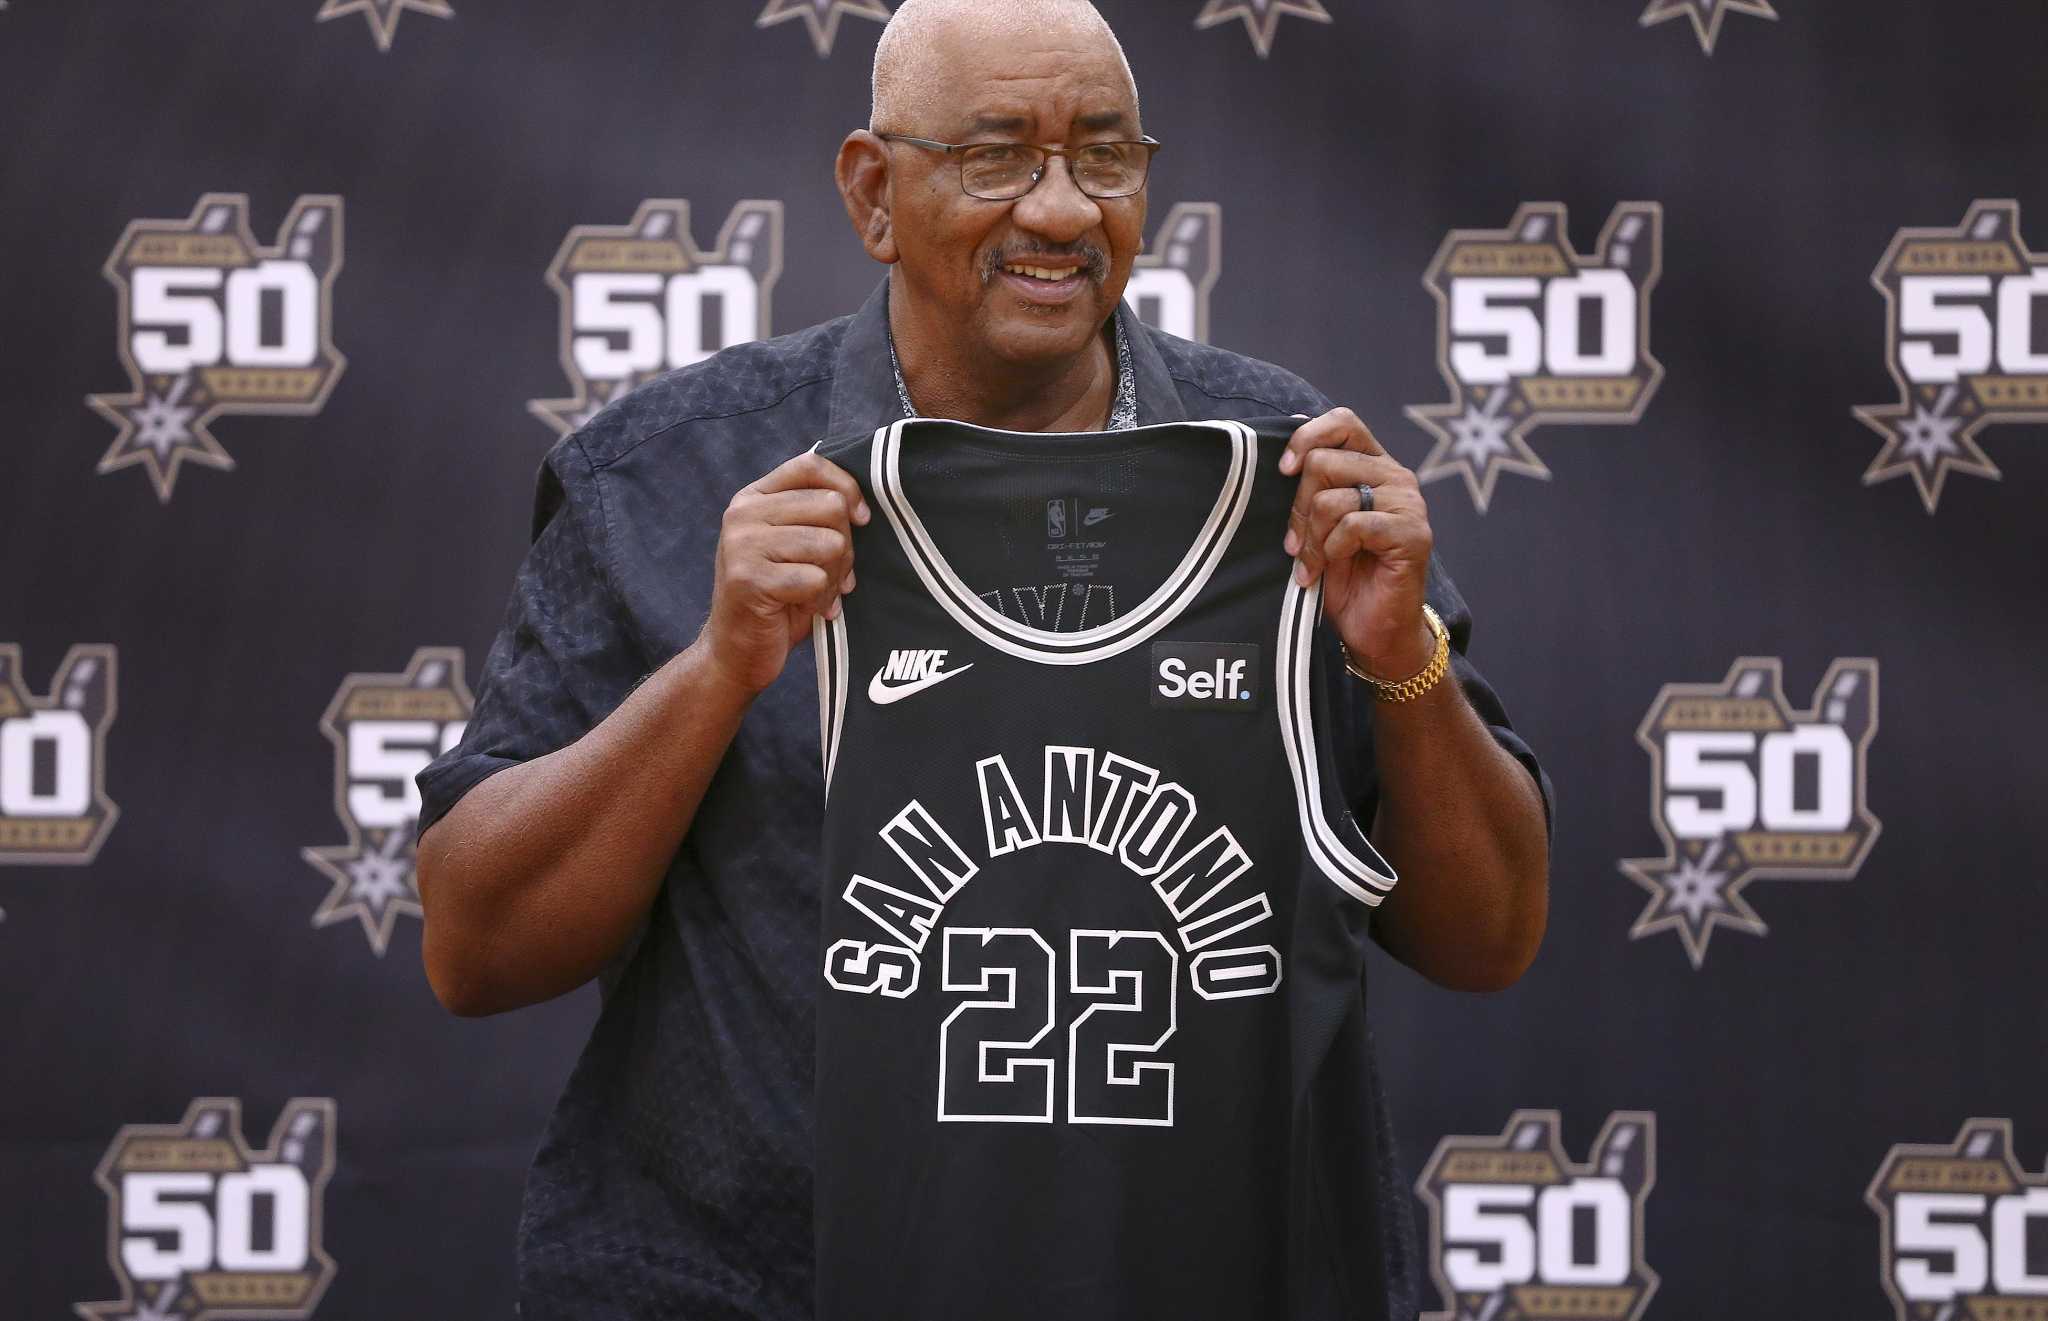 Spurs unveil iconic uniform to commemorate 50th anniversary of franchise